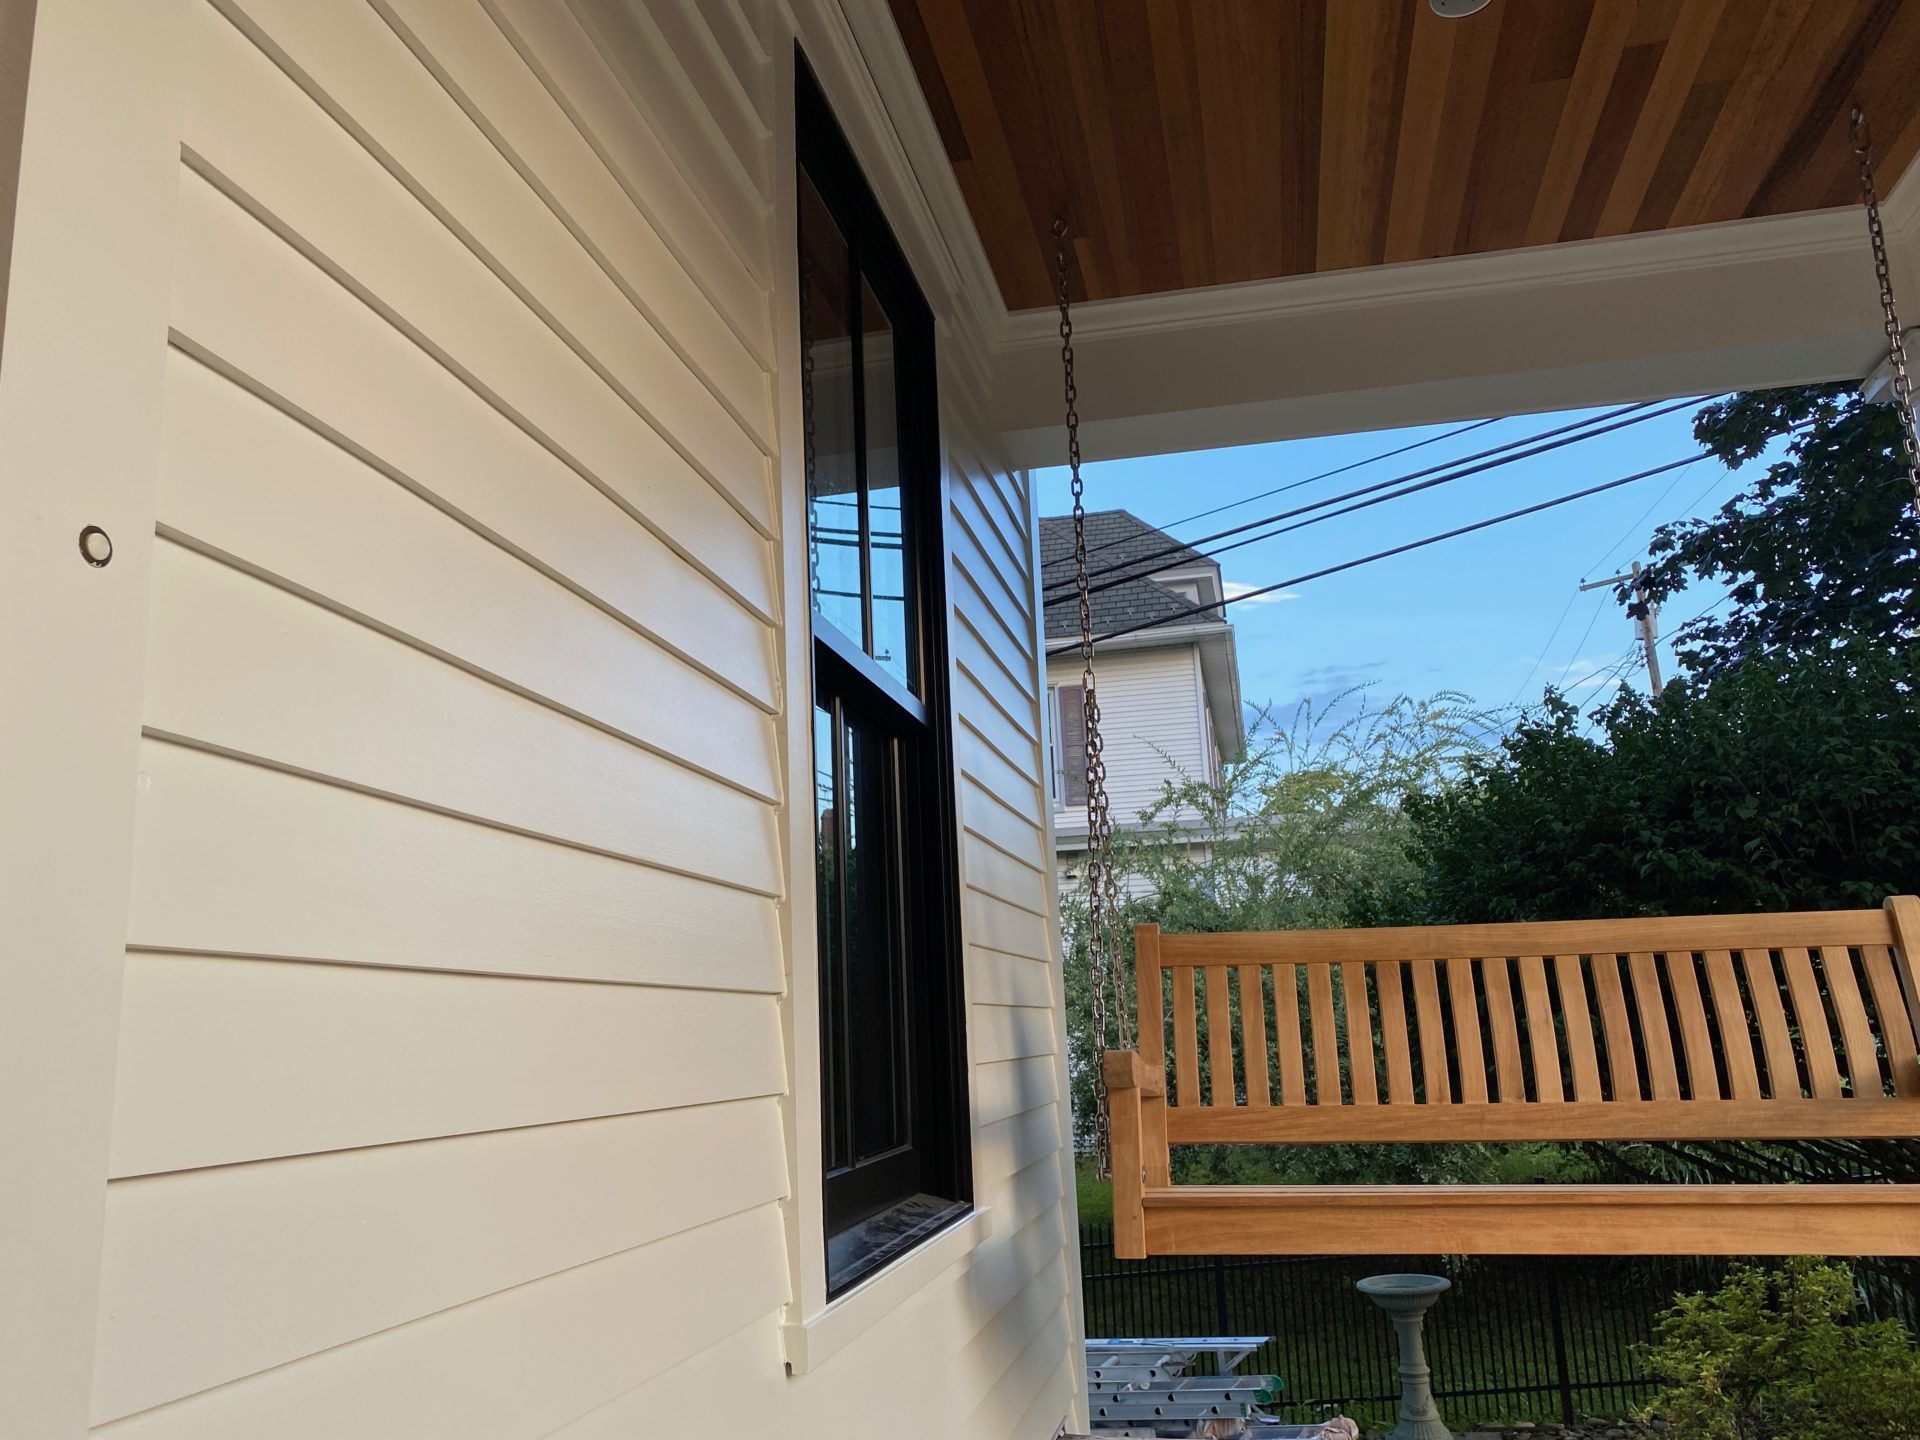 Newly repainting porch